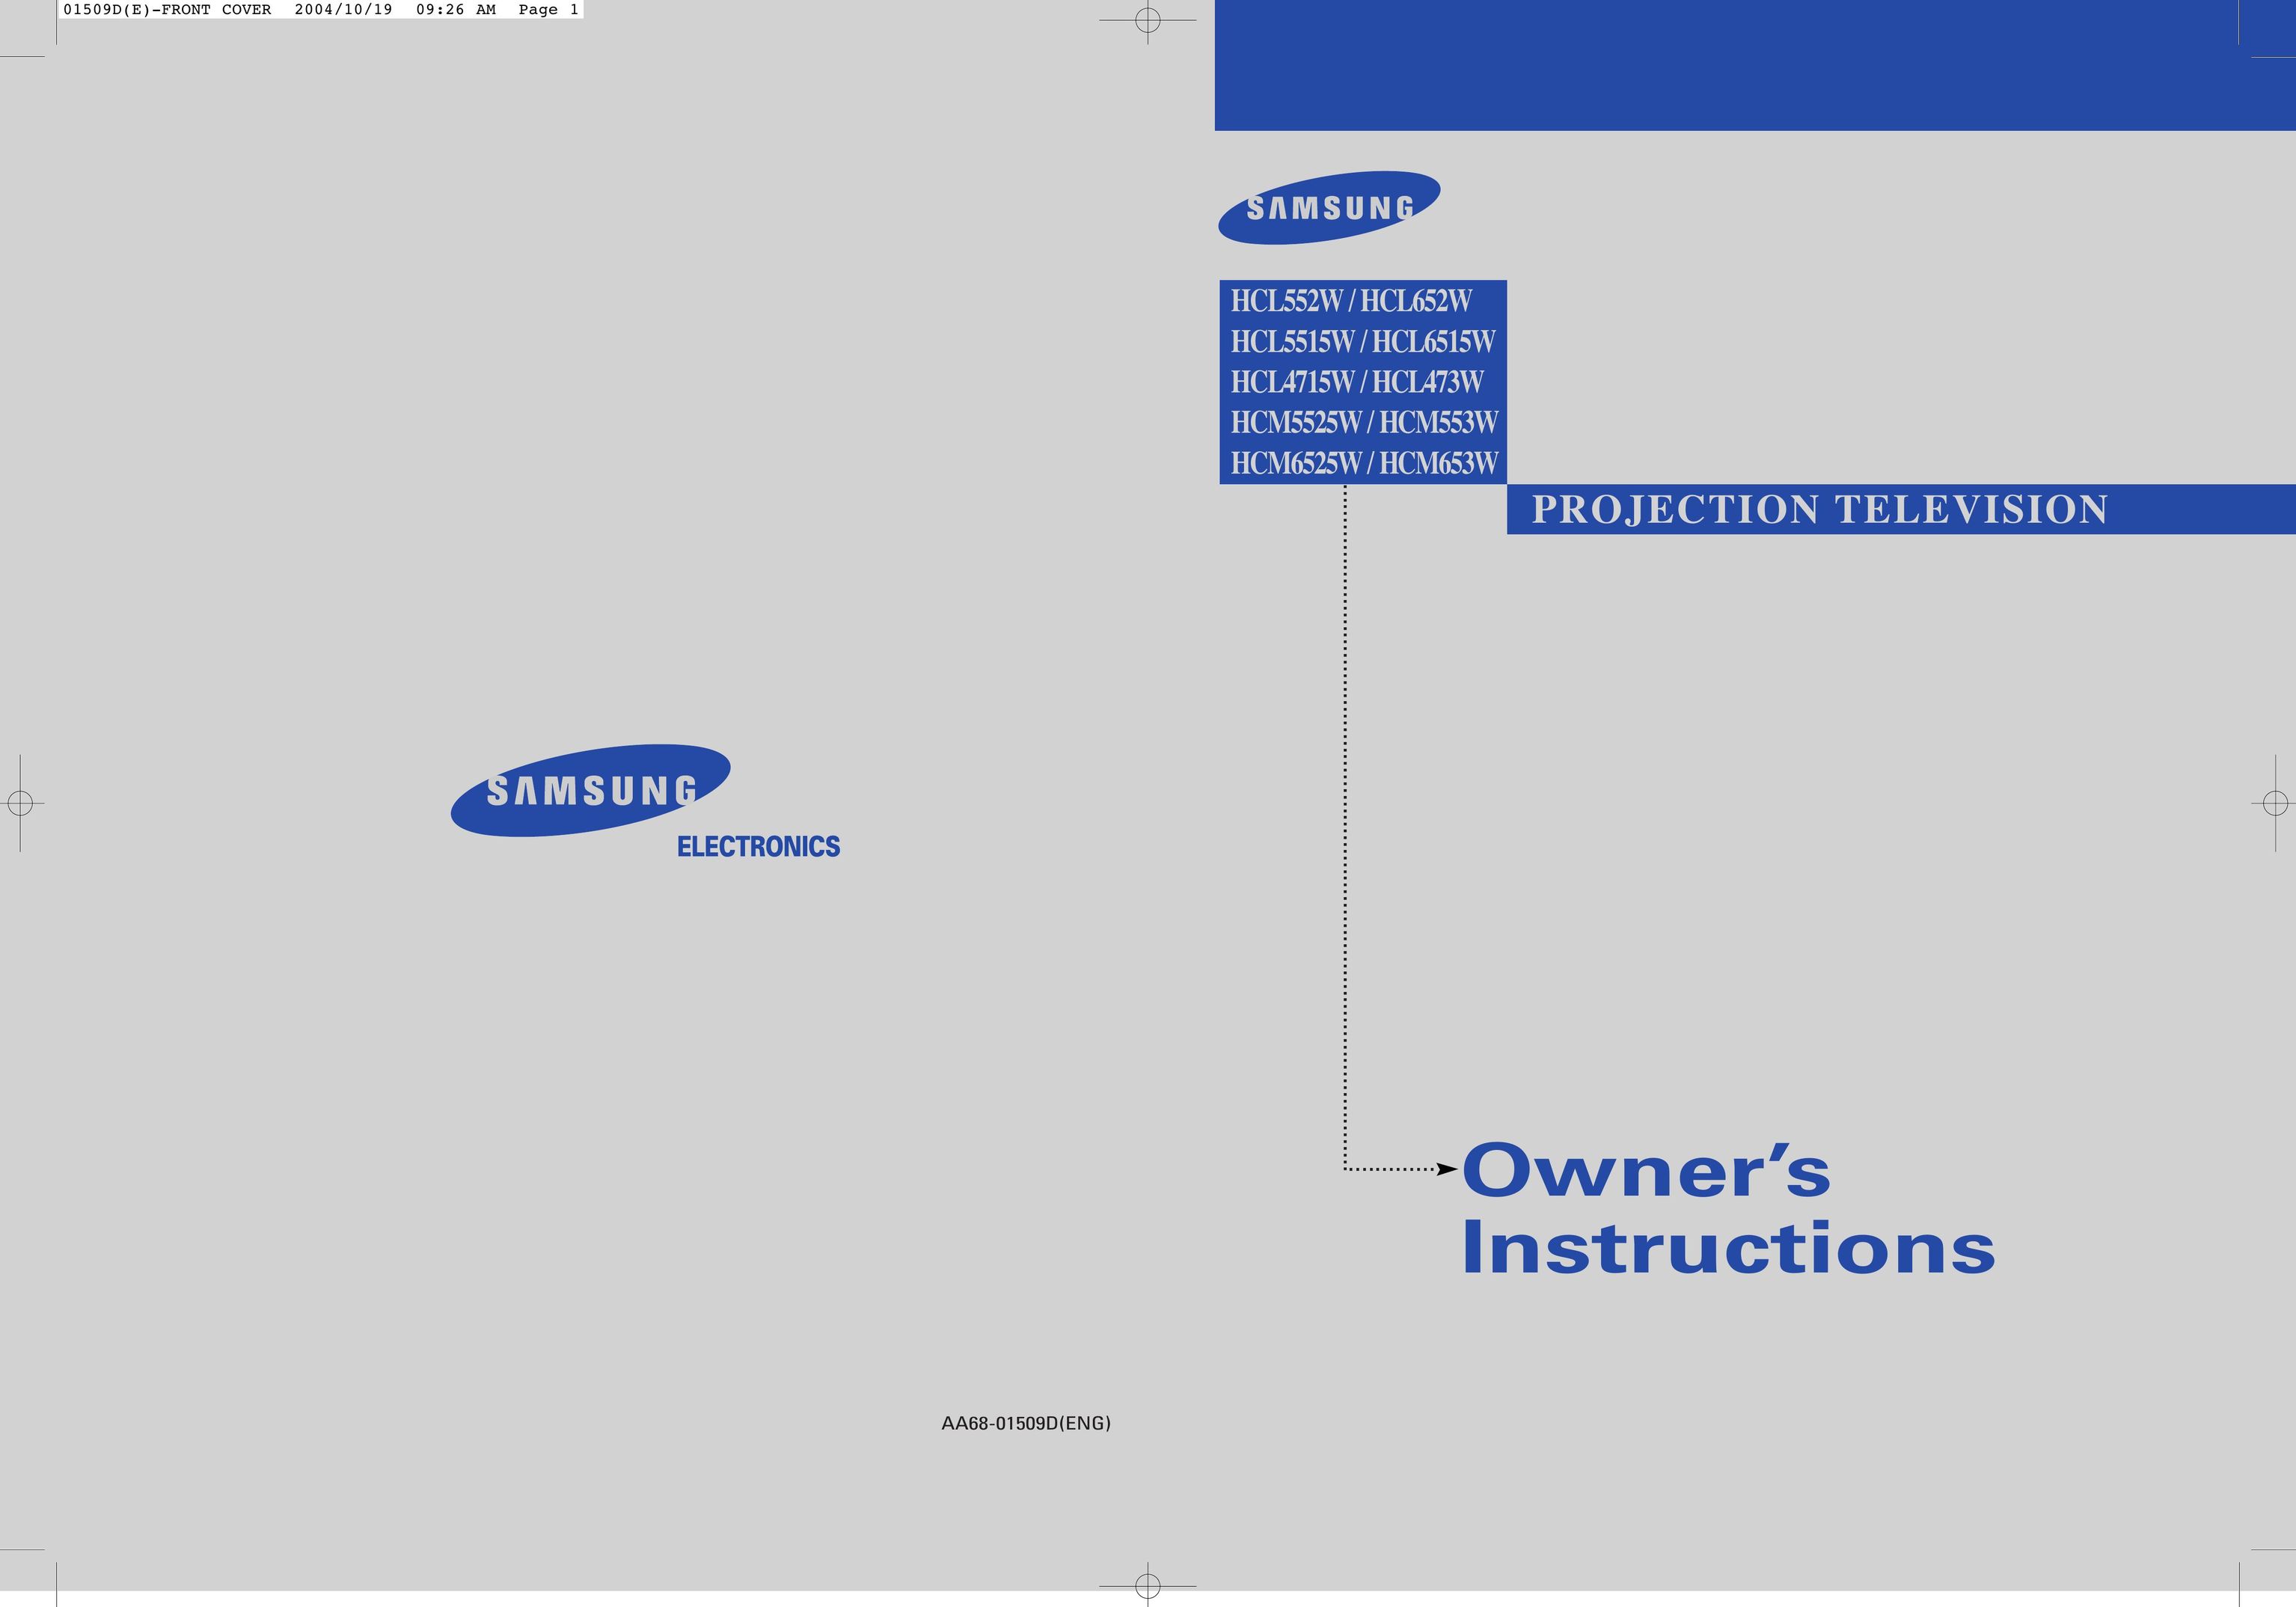 Samsung HCM653W Projection Television User Manual